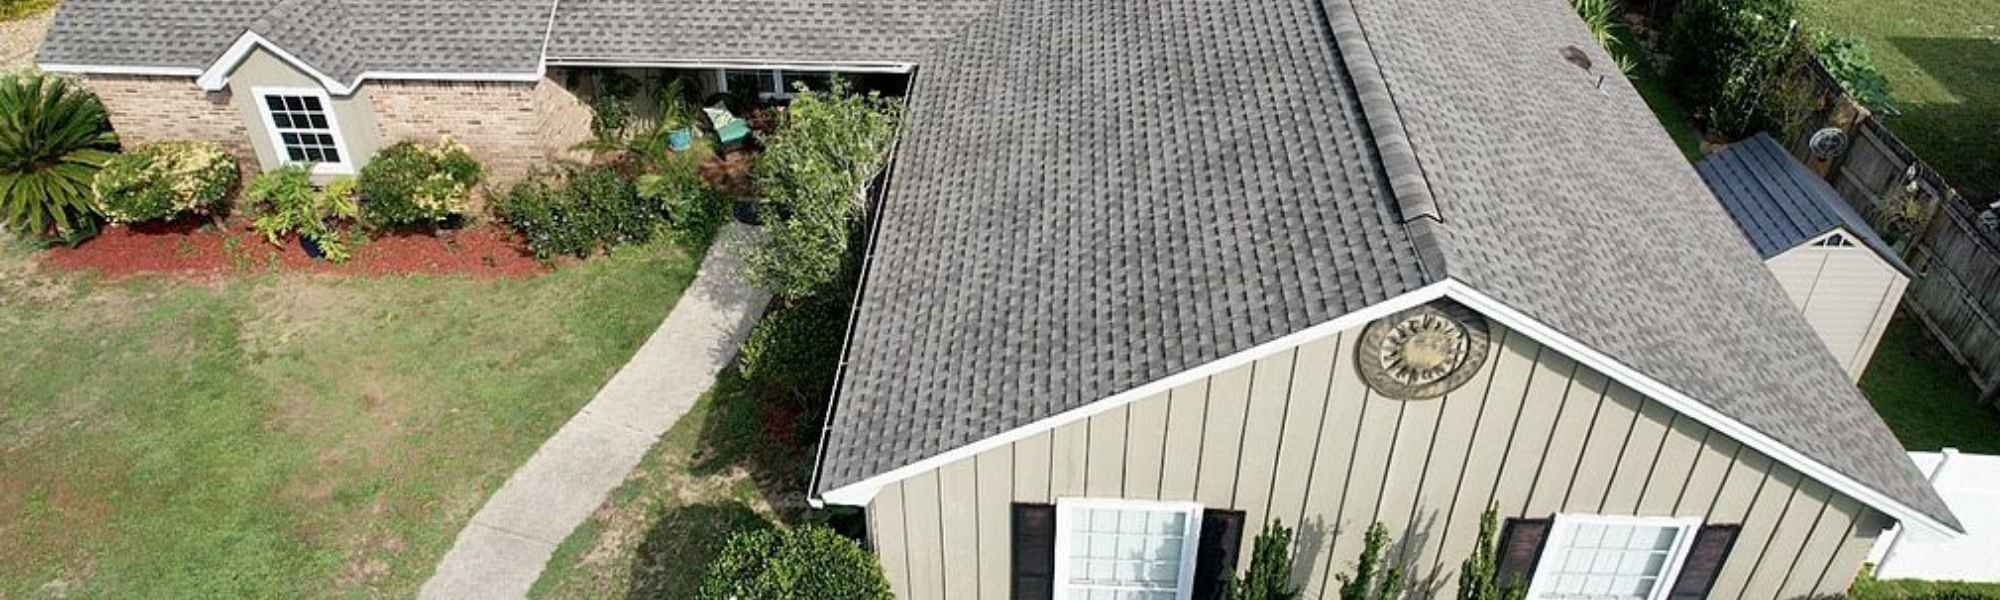 Roofing Insurance in Florida - best roofing company - metal roof contractor - roofer - leading residential and commercial roof repair companies - Pensacola, Panama City, Destin, Port Charlotte, Fort Myers, Sarasota, Punta Gorda, Navarre, Milton, Gulf Breeze, Mary Esther, Lynn Haven